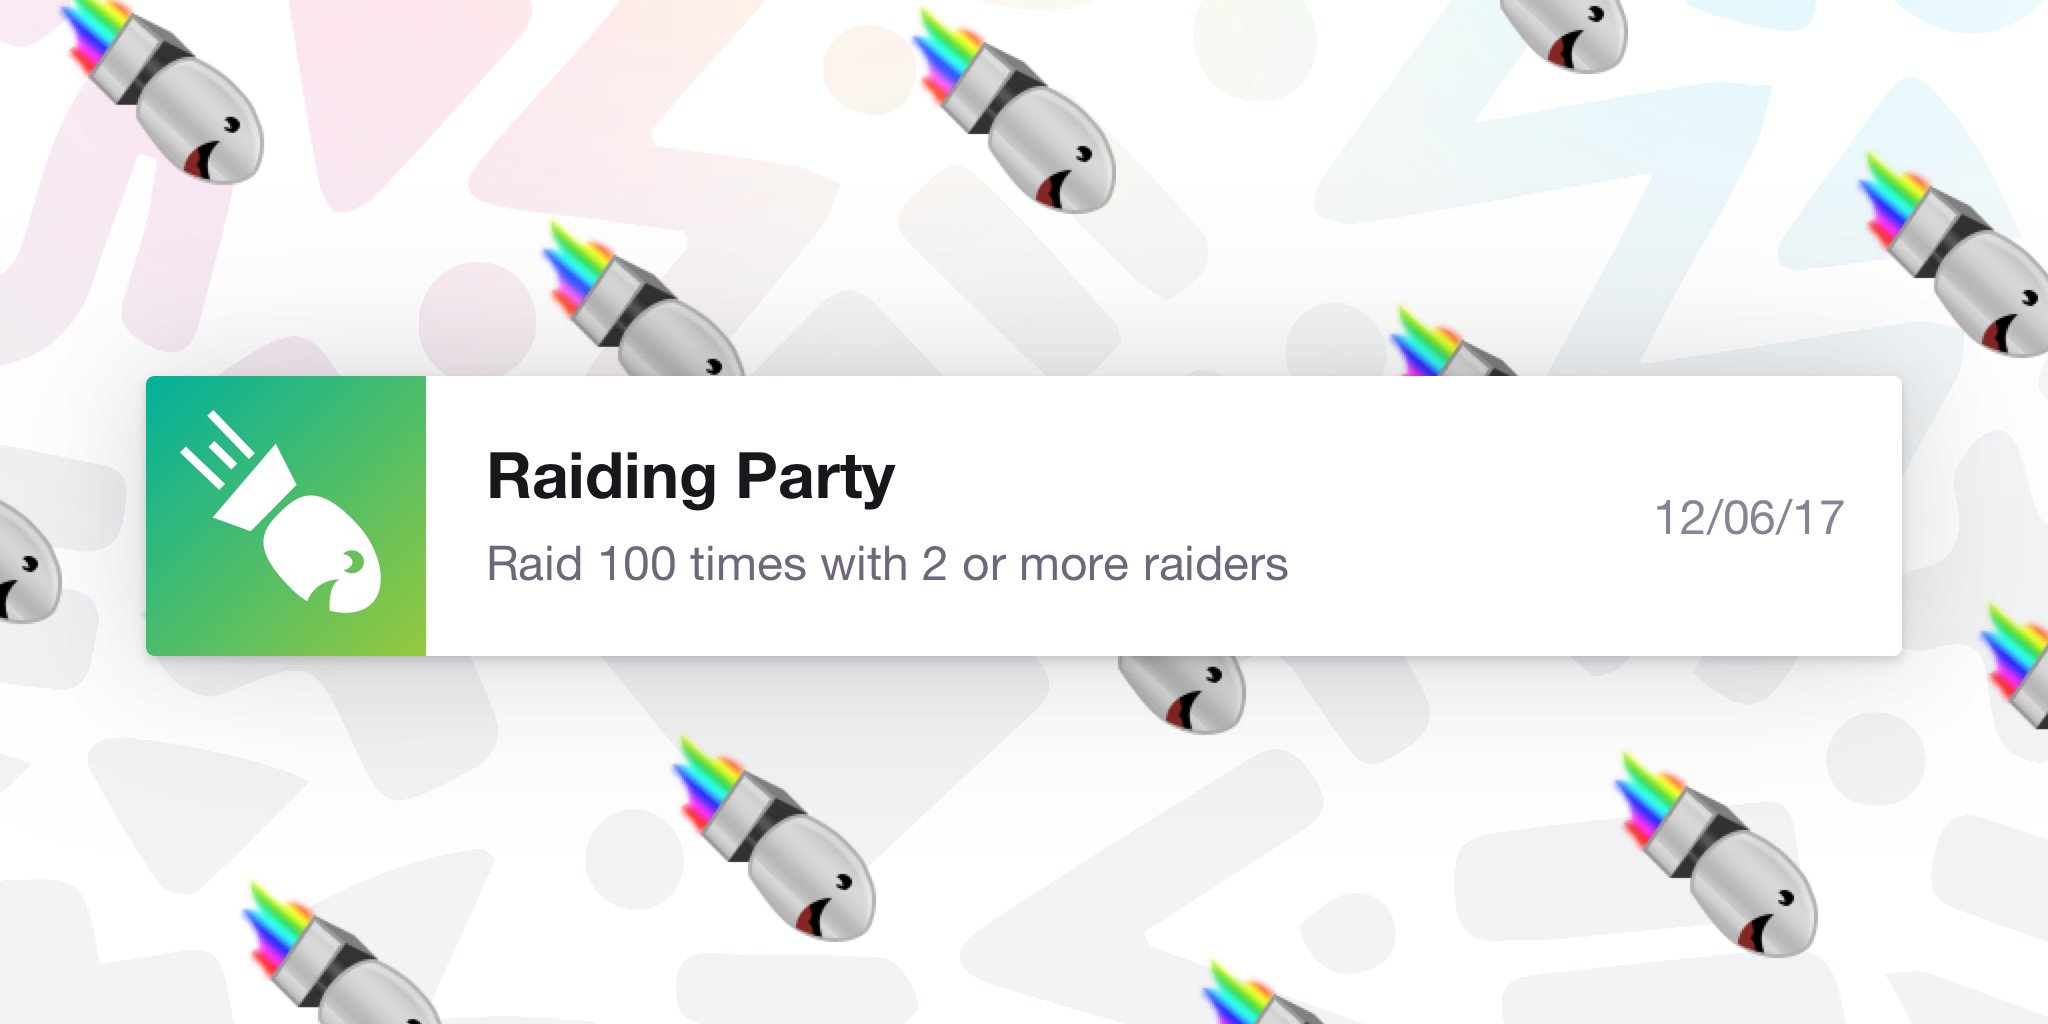 Twitch Sharing The Love With Raids From Your Stream Now You Can Earn The Raiding Party Achievement For 100 Raids